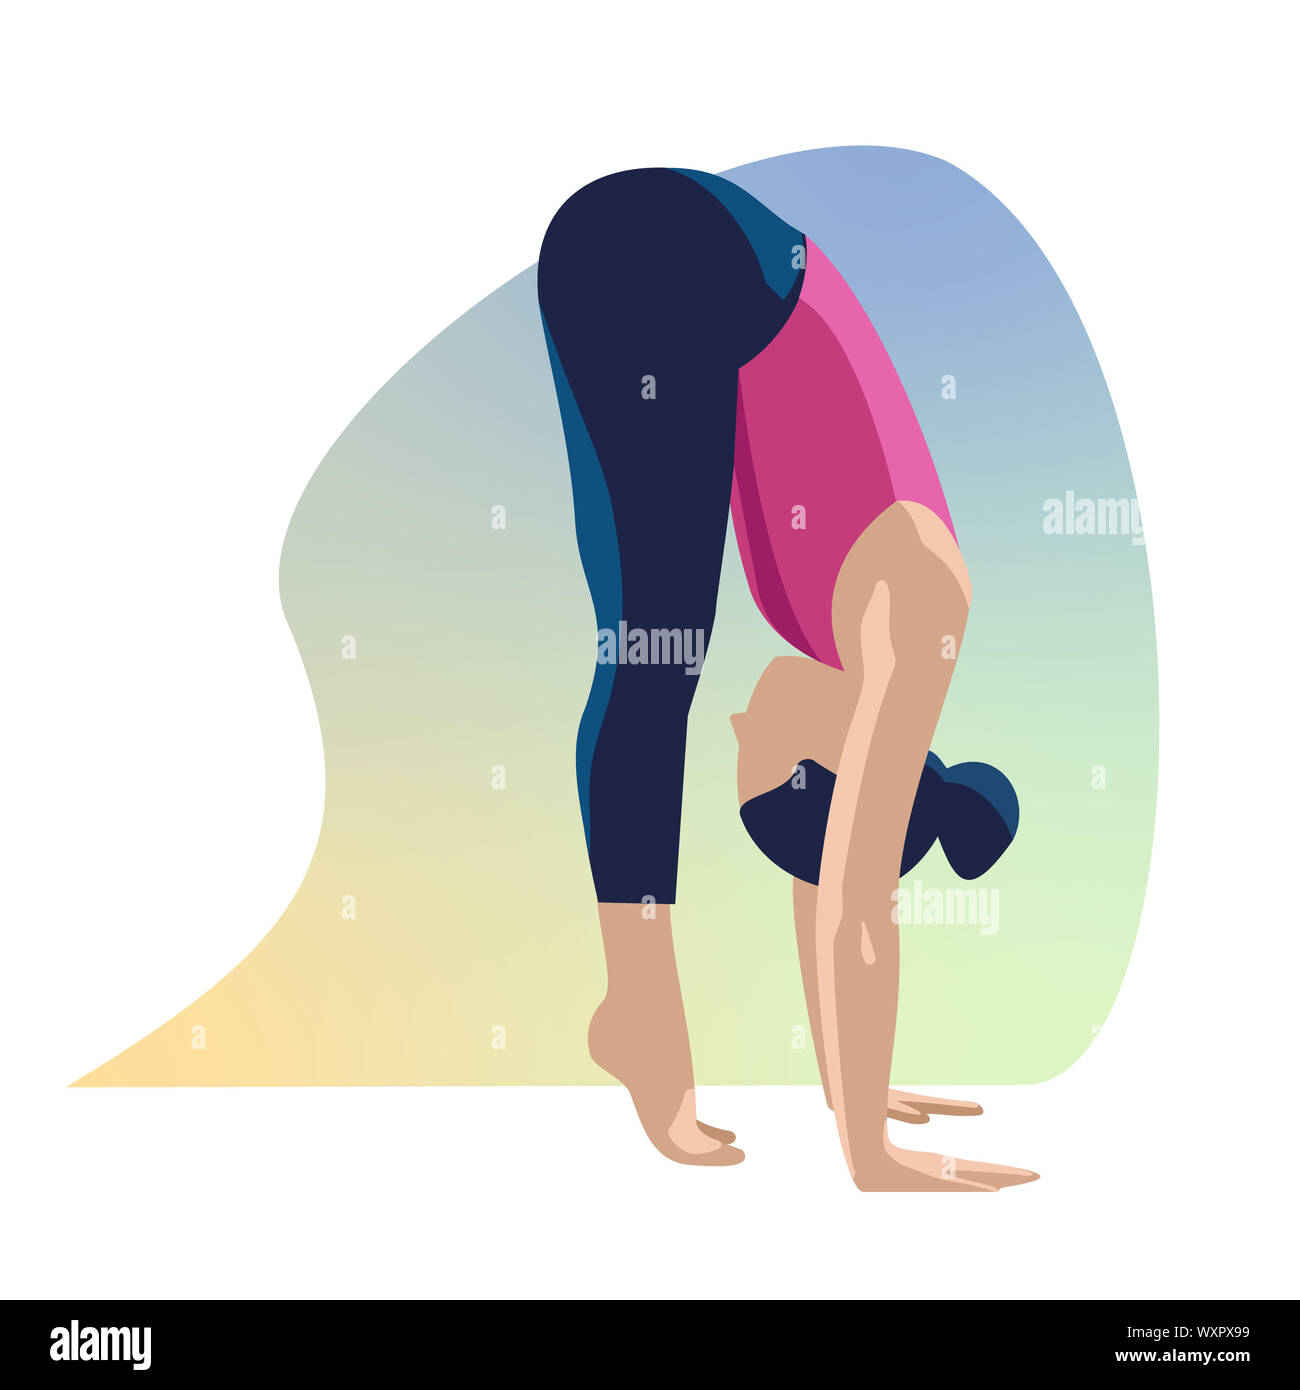 Plus size abstract woman workout in yoga poses. Bodypositive lady